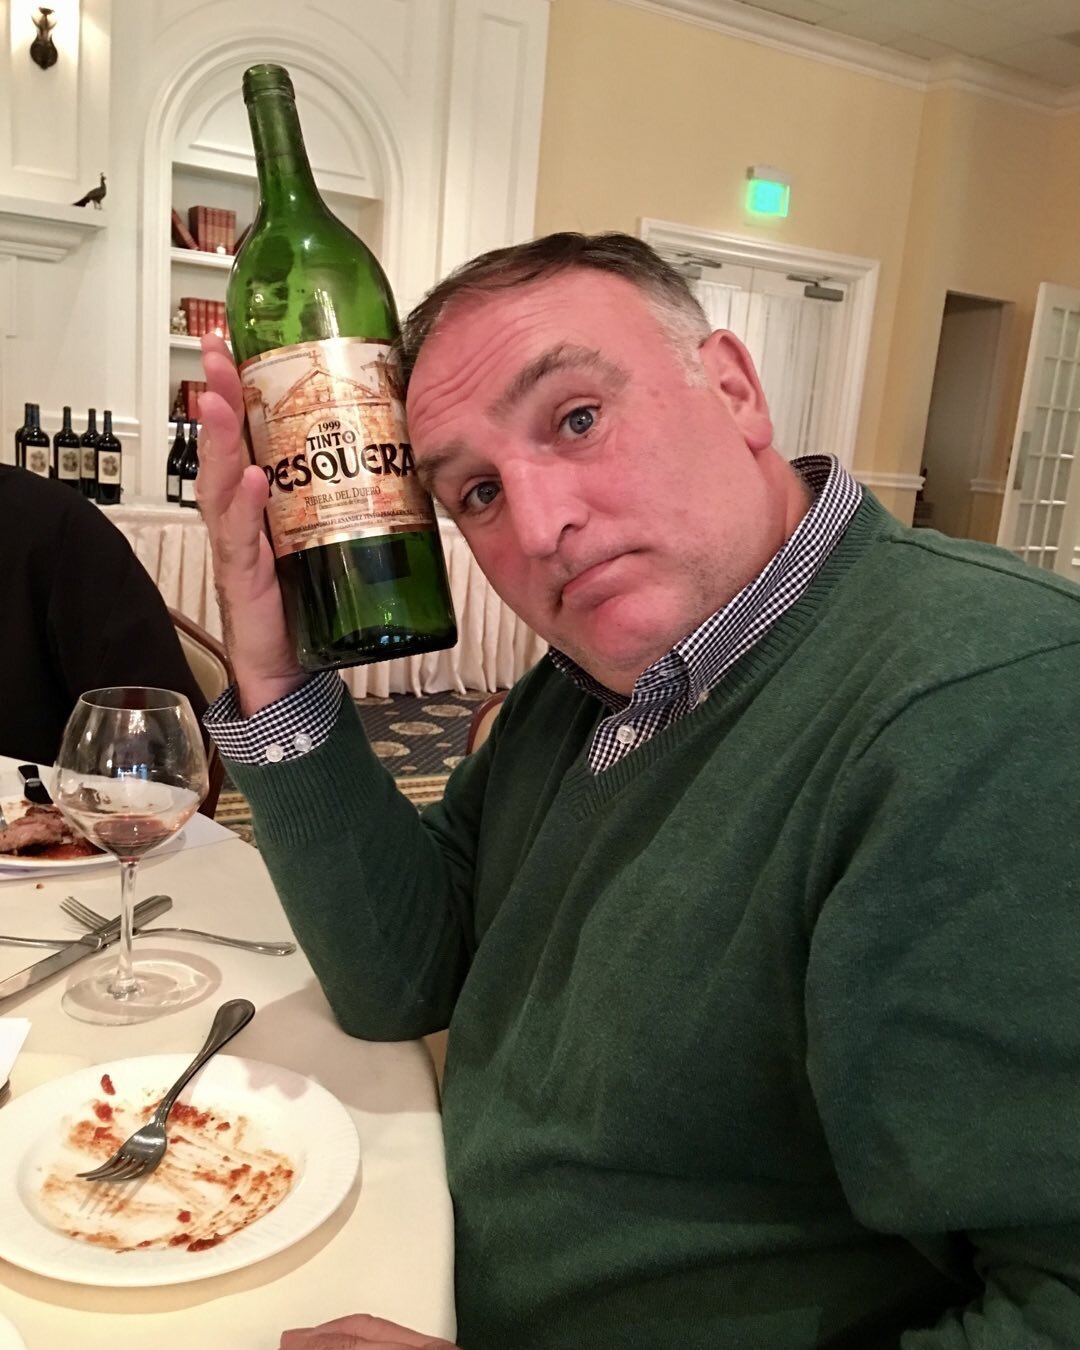 Happy Birthday @chefjoseandres I have more bottles of your favorites to share next time we are together! 🎂🥂🍷